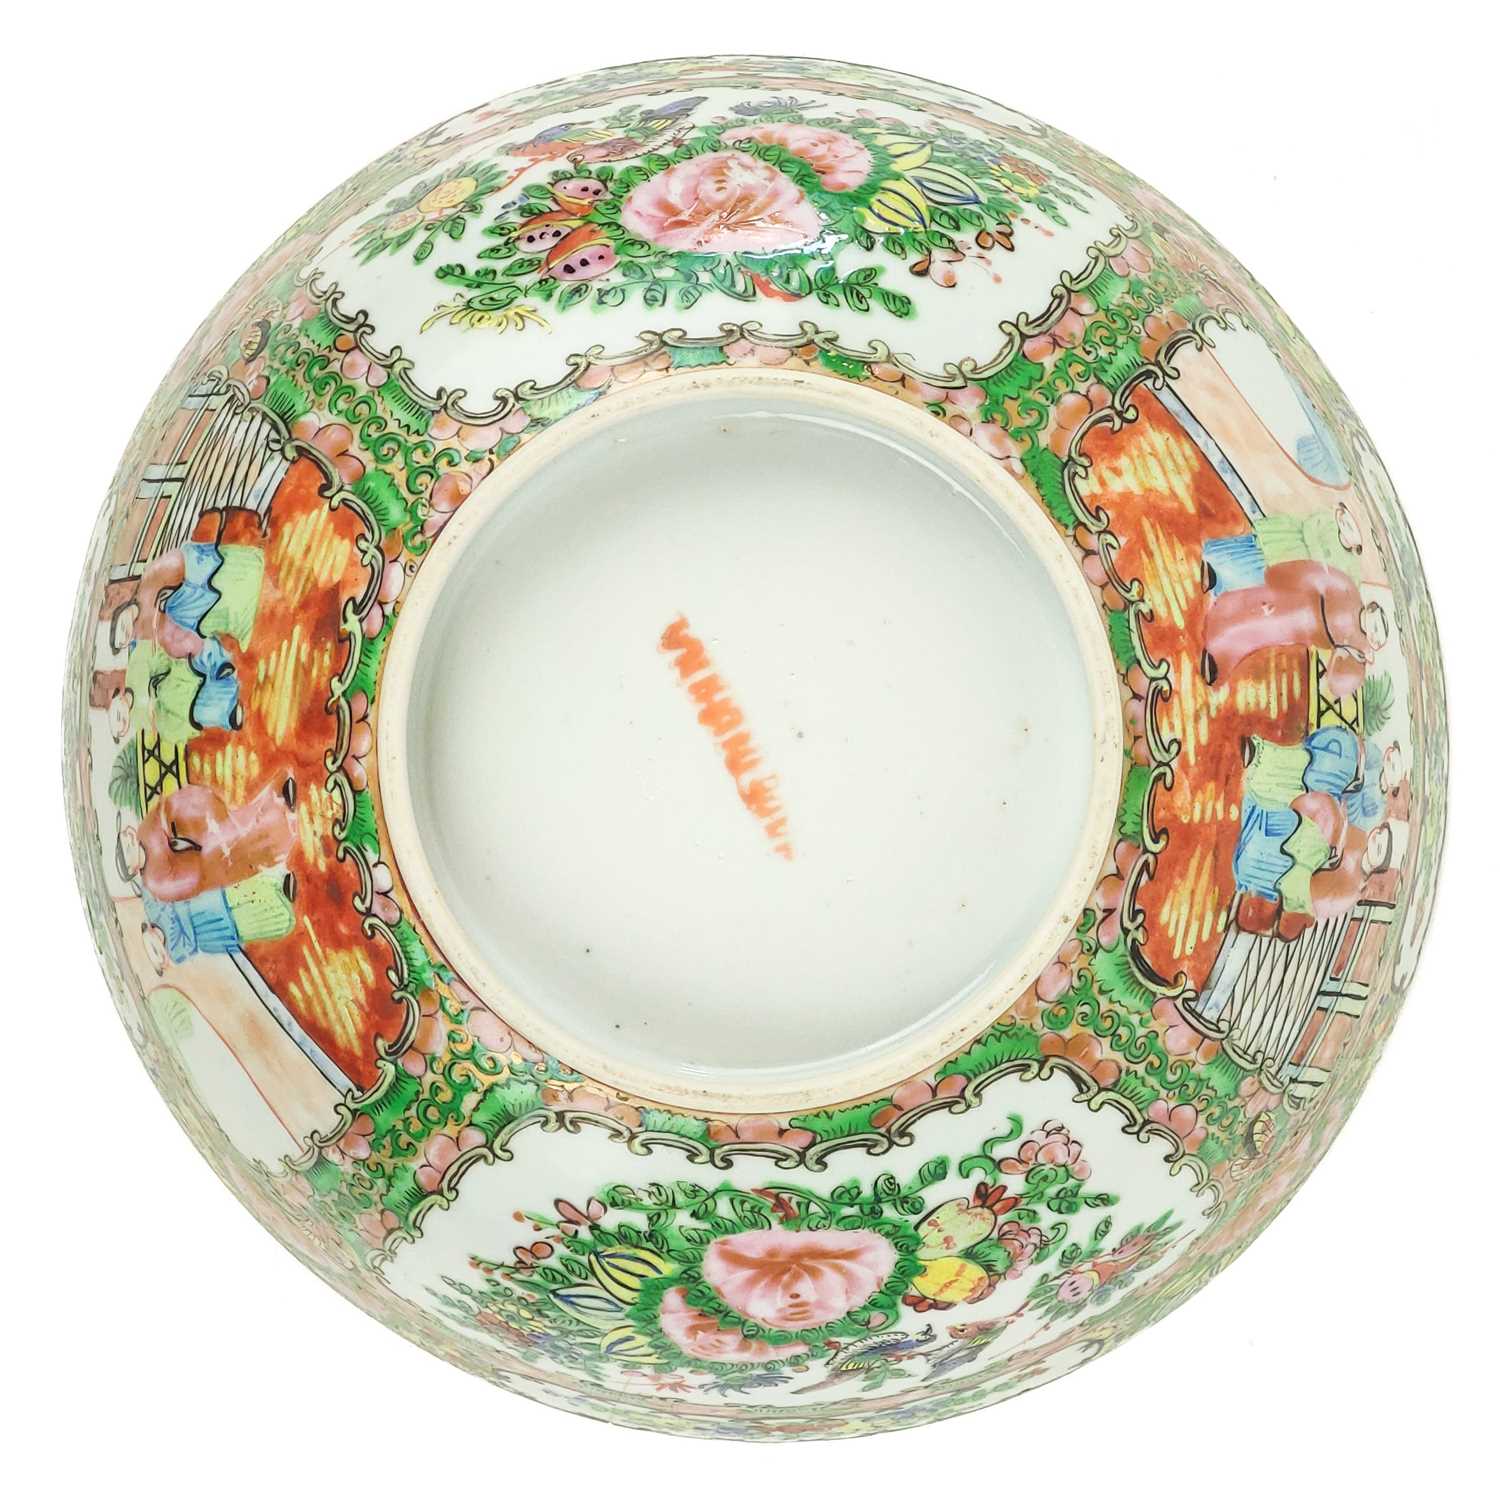 A Chinese Canton porcelain bowl, 20th century. - Image 2 of 3